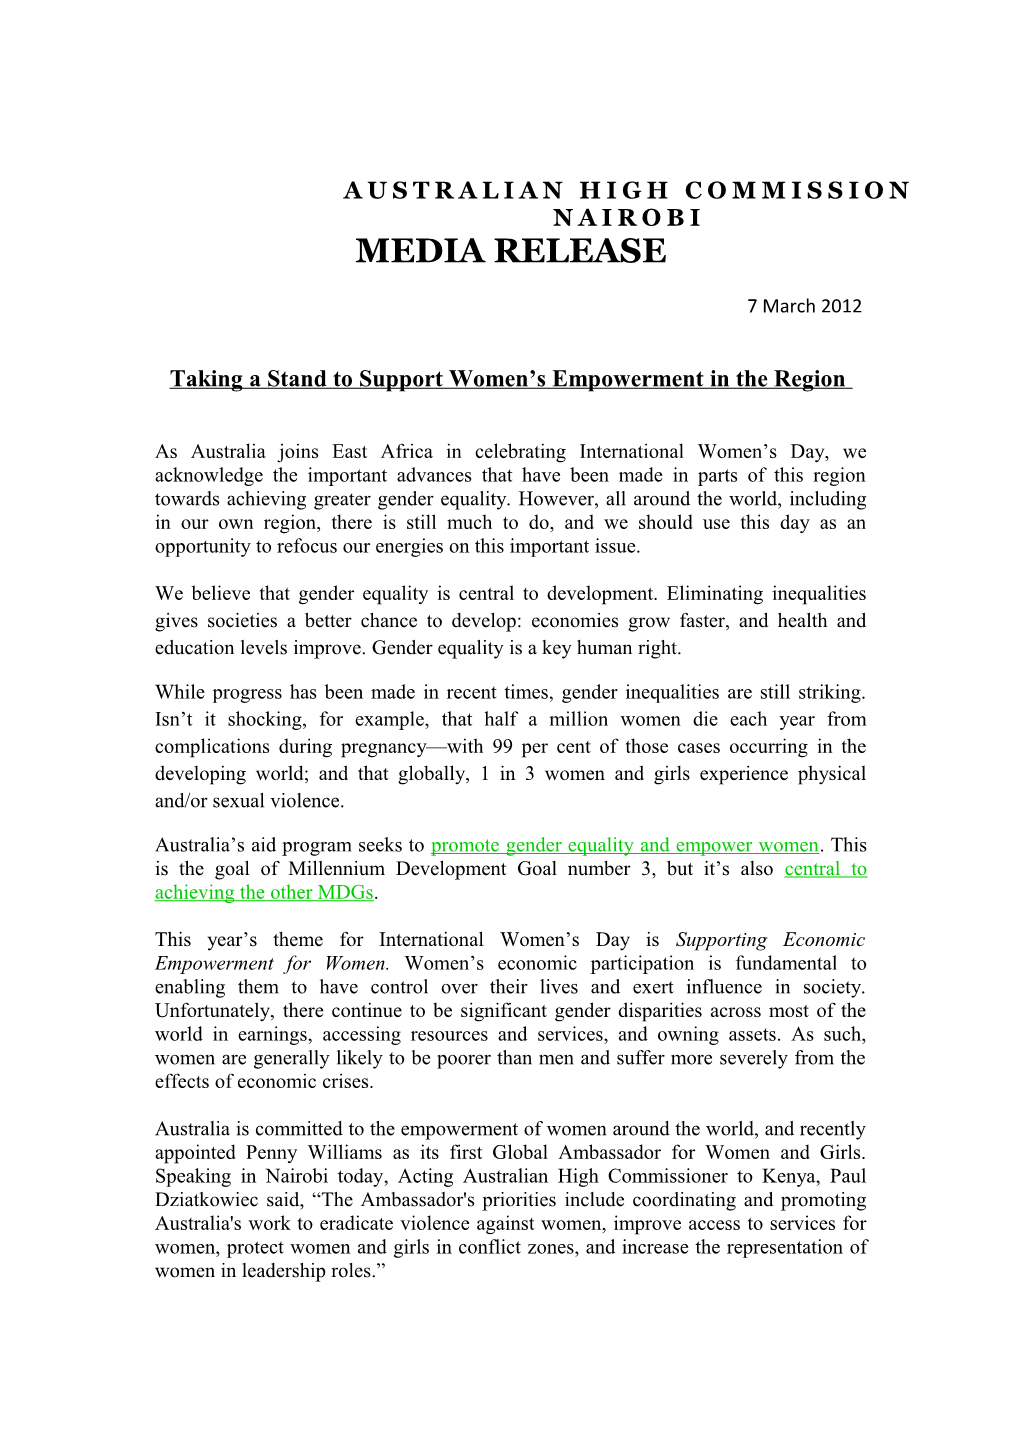 Taking a Stand to Support Women S Empowerment in the Region